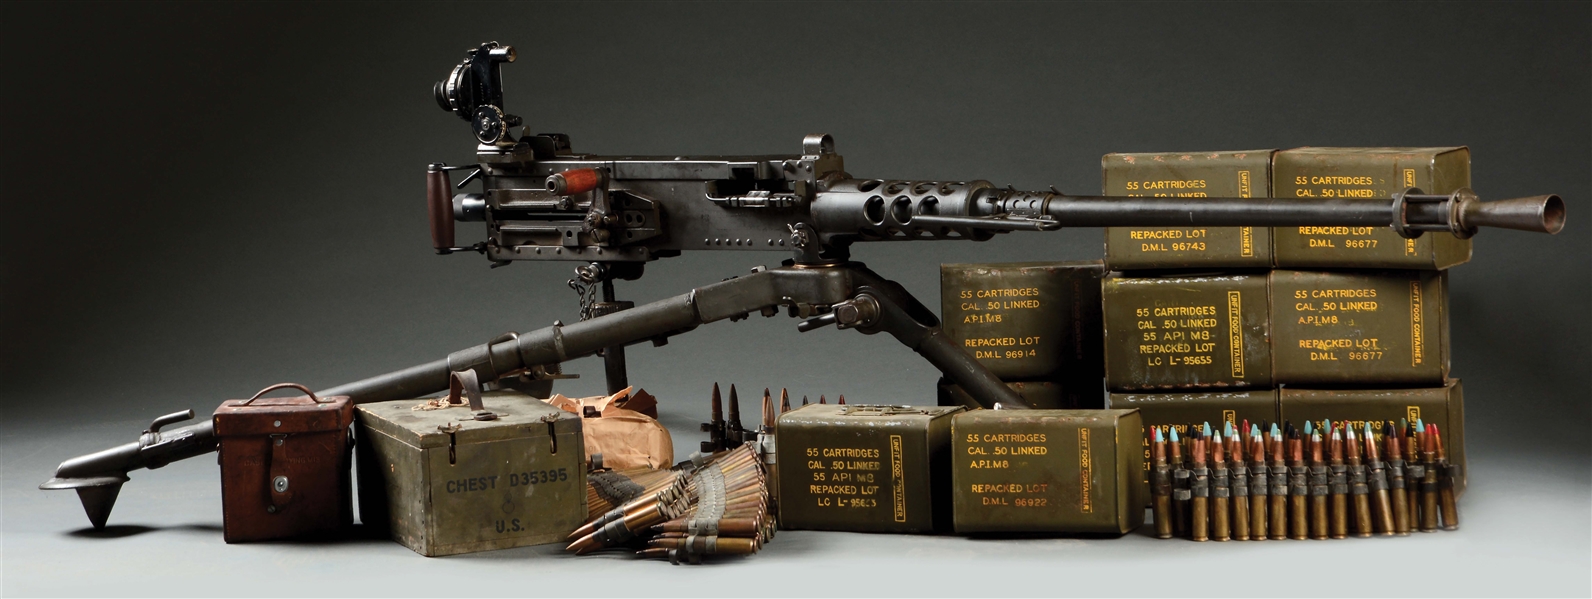 (N) WELL ACCESSORIZED AND HIGHLY COLLECTIBLE WORLD WAR II SAVAGE ARMS CORPORATION U.S. M2 HEAVY BARRELED .50 BMG MACHINE GUN (CURIO AND RELIC).